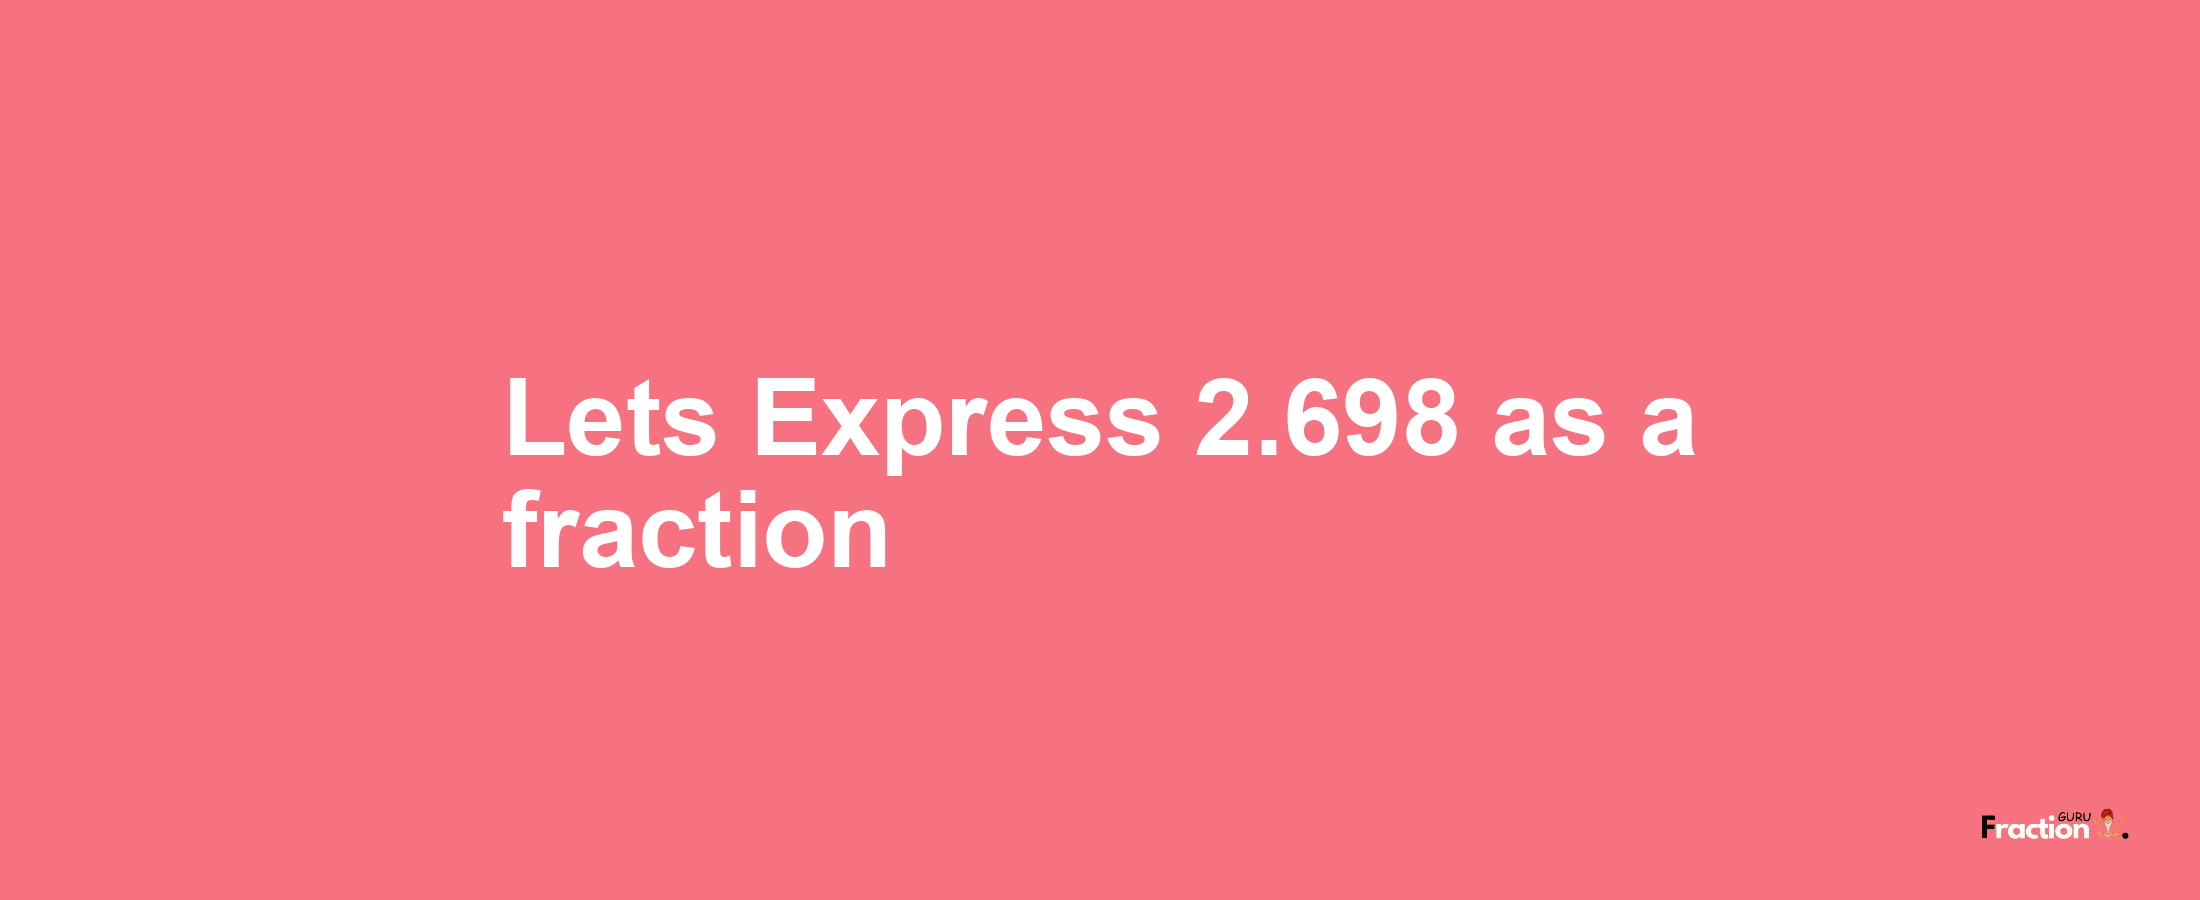 Lets Express 2.698 as afraction